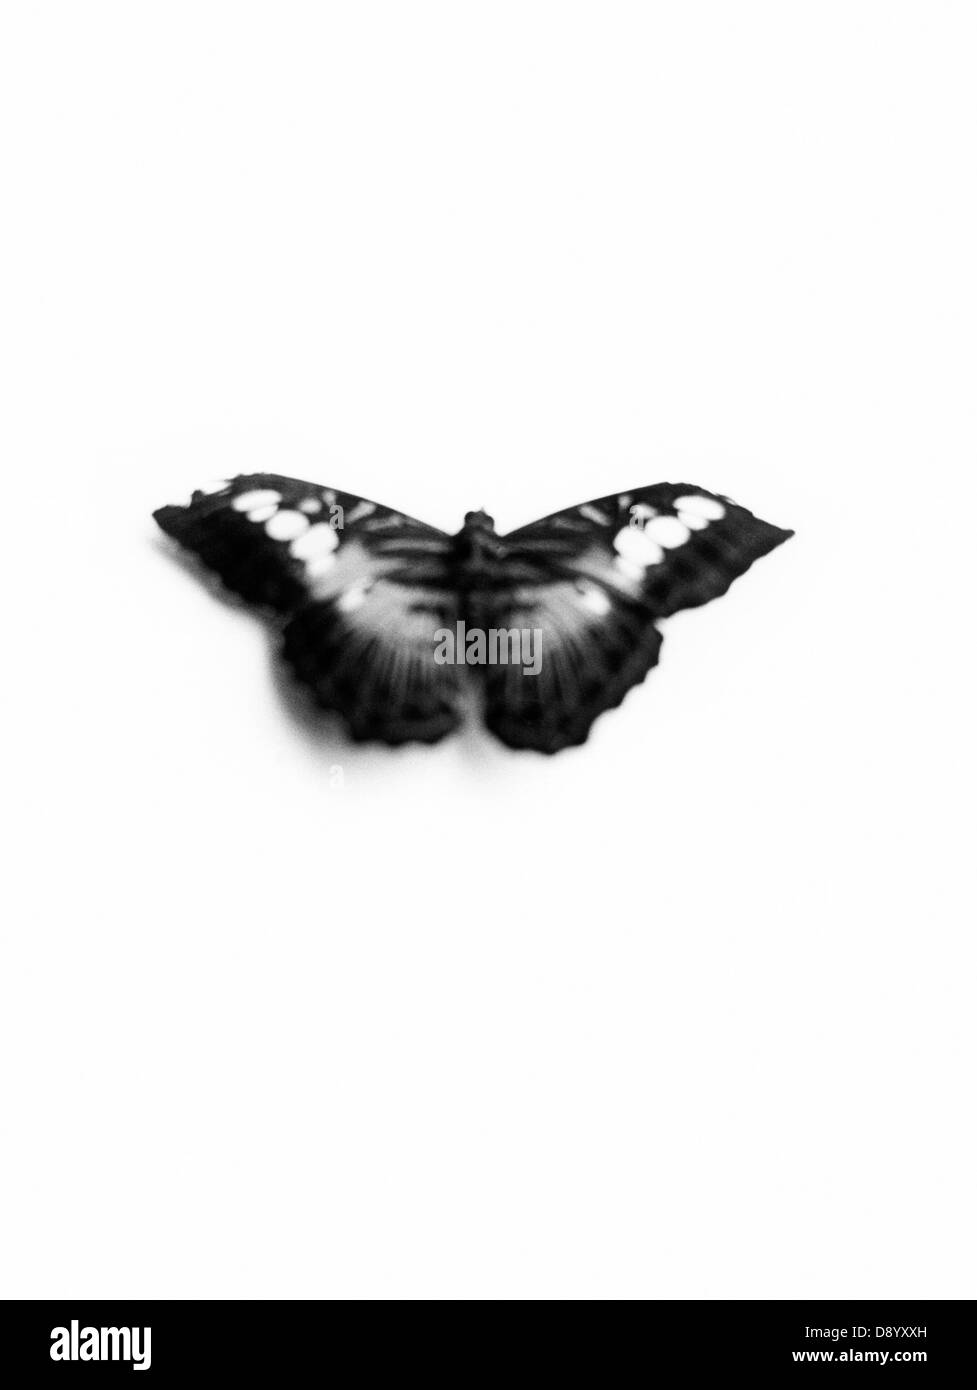 A butterfly. Stock Photo